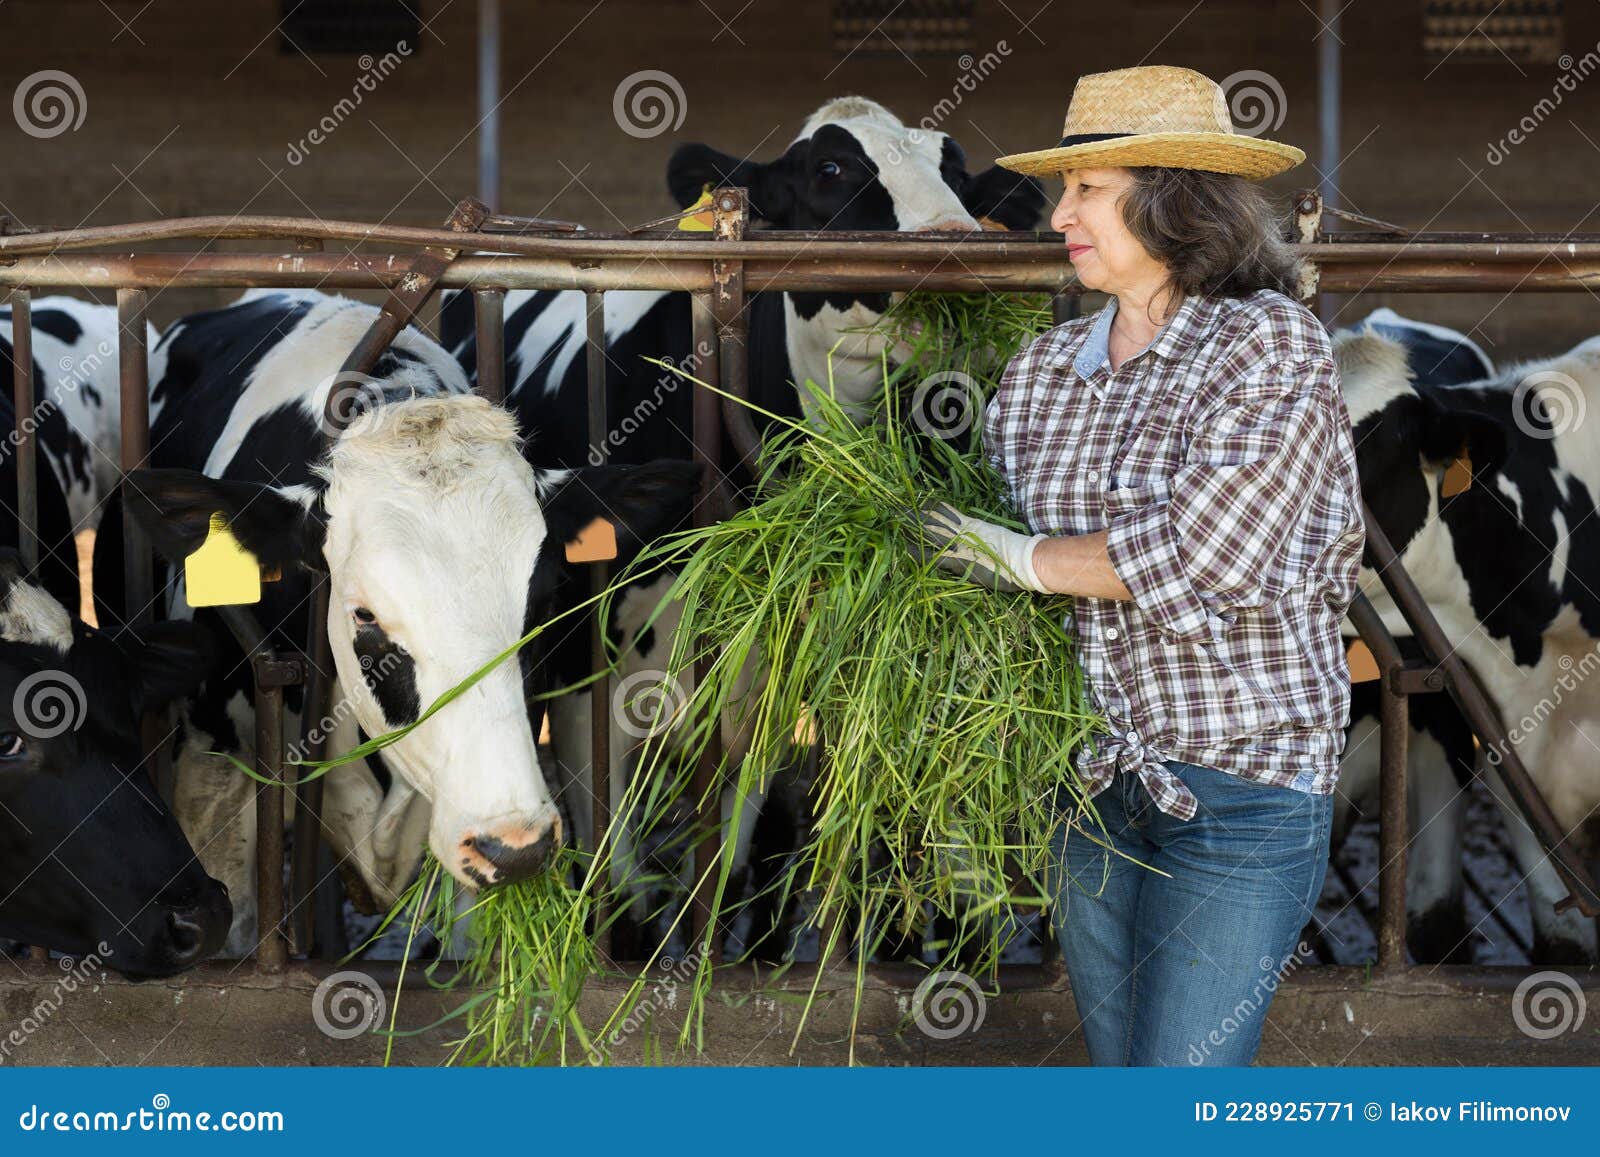 Woman Farmer Feeding Cows with Fresh Grass in Cowshed Stock Image - Image  of domestic, animal: 228925771